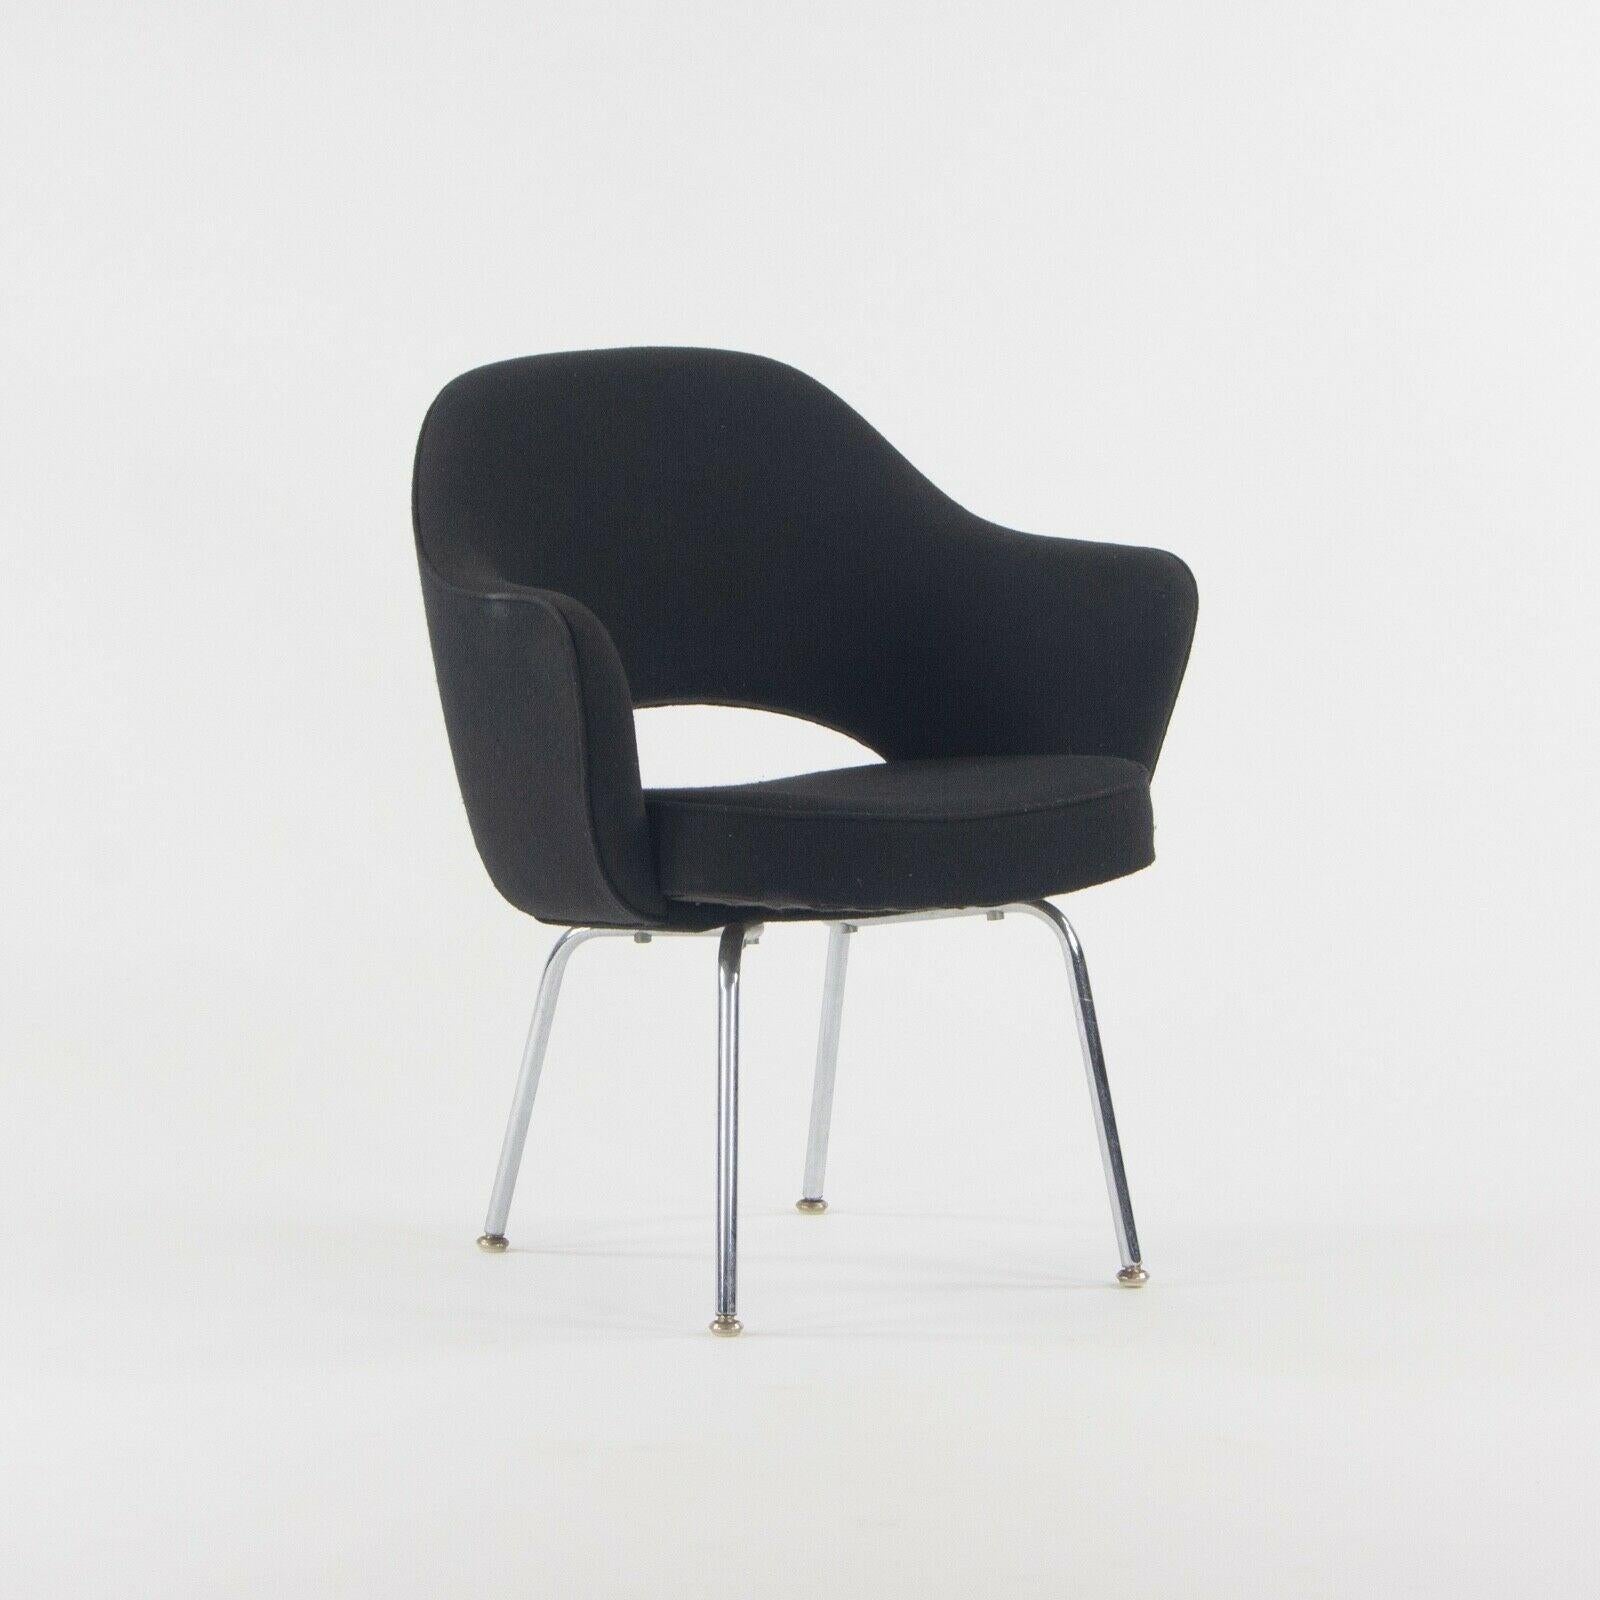 Listed for sale is an Executive Armchair with tubular legs designed by Eero Saarinen and produced by Knoll. This chair was at one point in its life professionally reupholstered in a black hopsack-like fabric. The upholstery was done very nicely. It